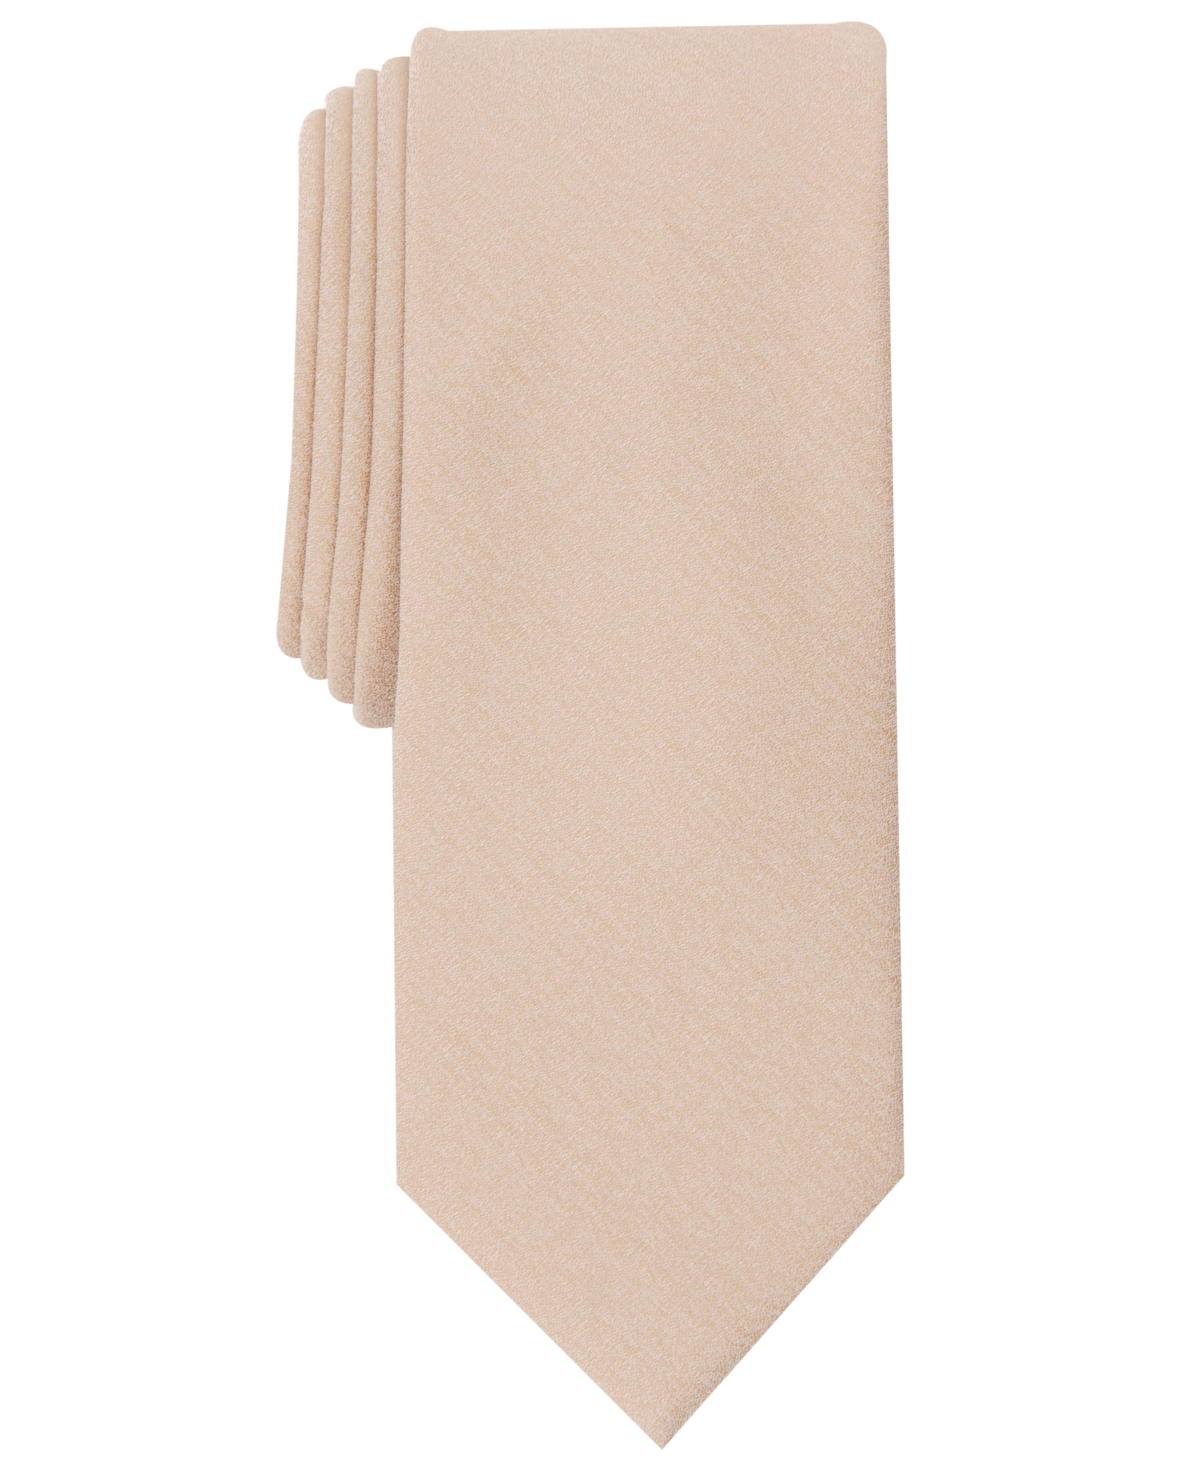 Sable Solid Tie, Created for Macy's - Taupe